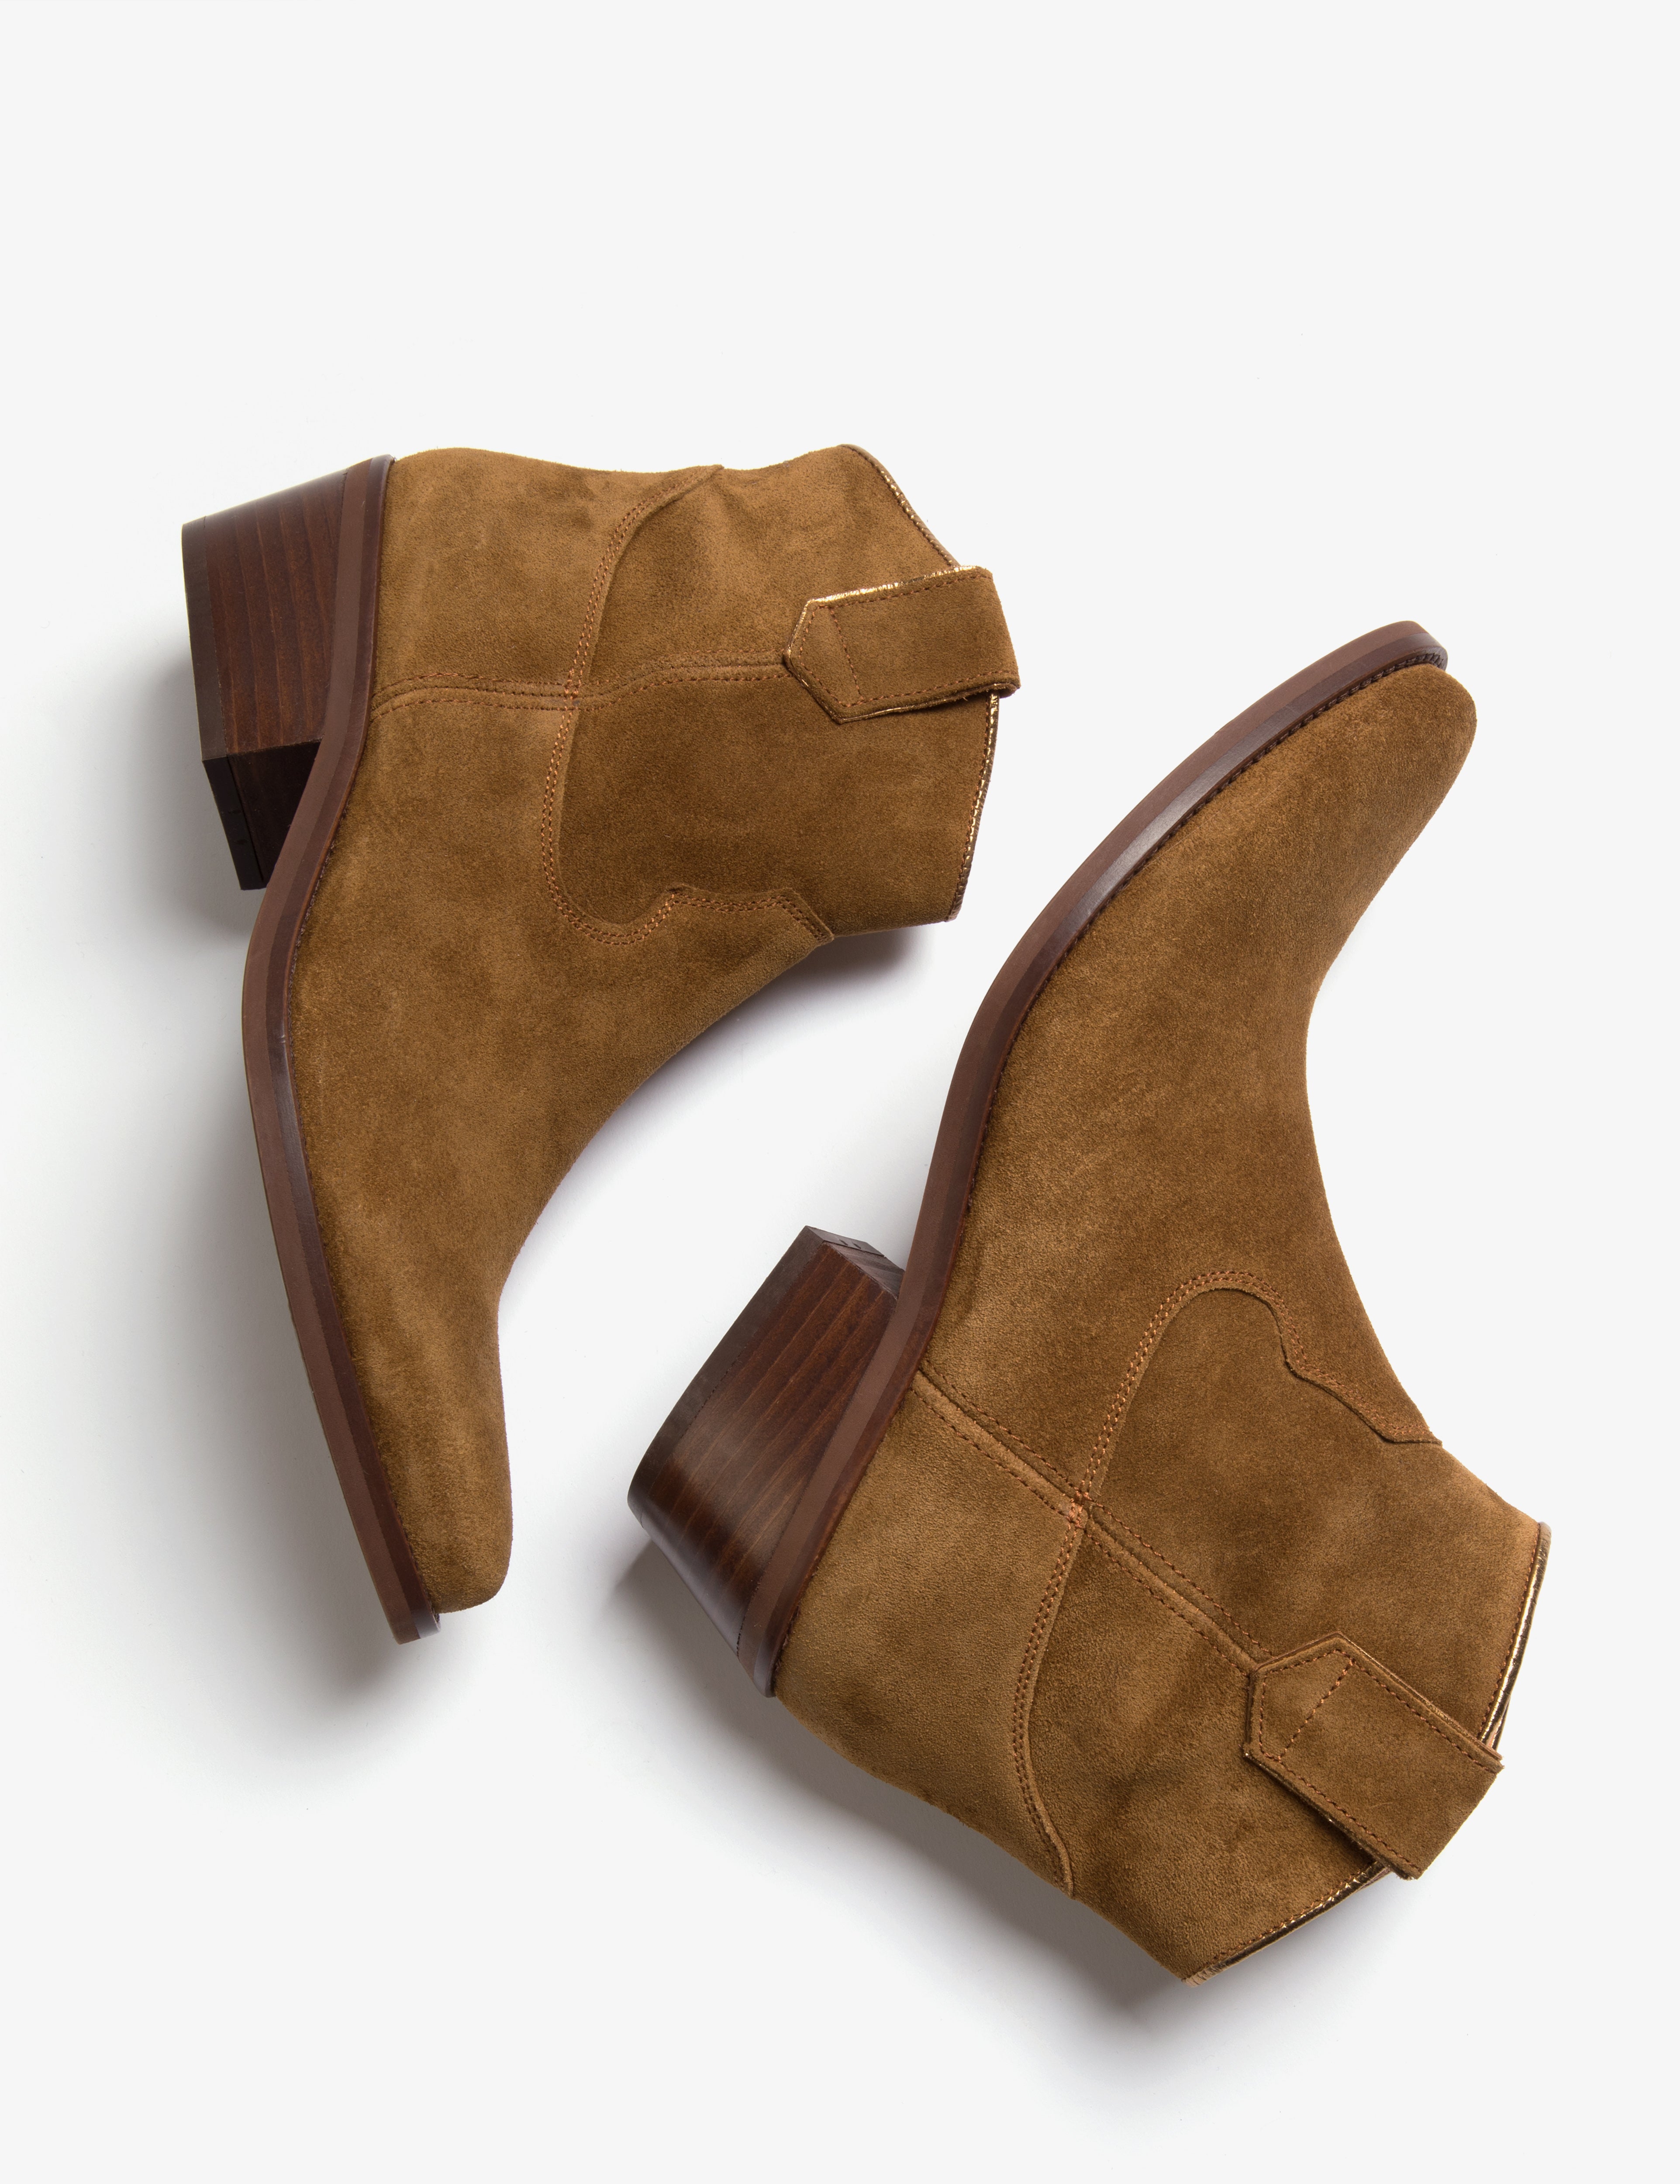 CHELSEA BOOTS IN BROWN COFFEE SUEDE CASSADY BRIT